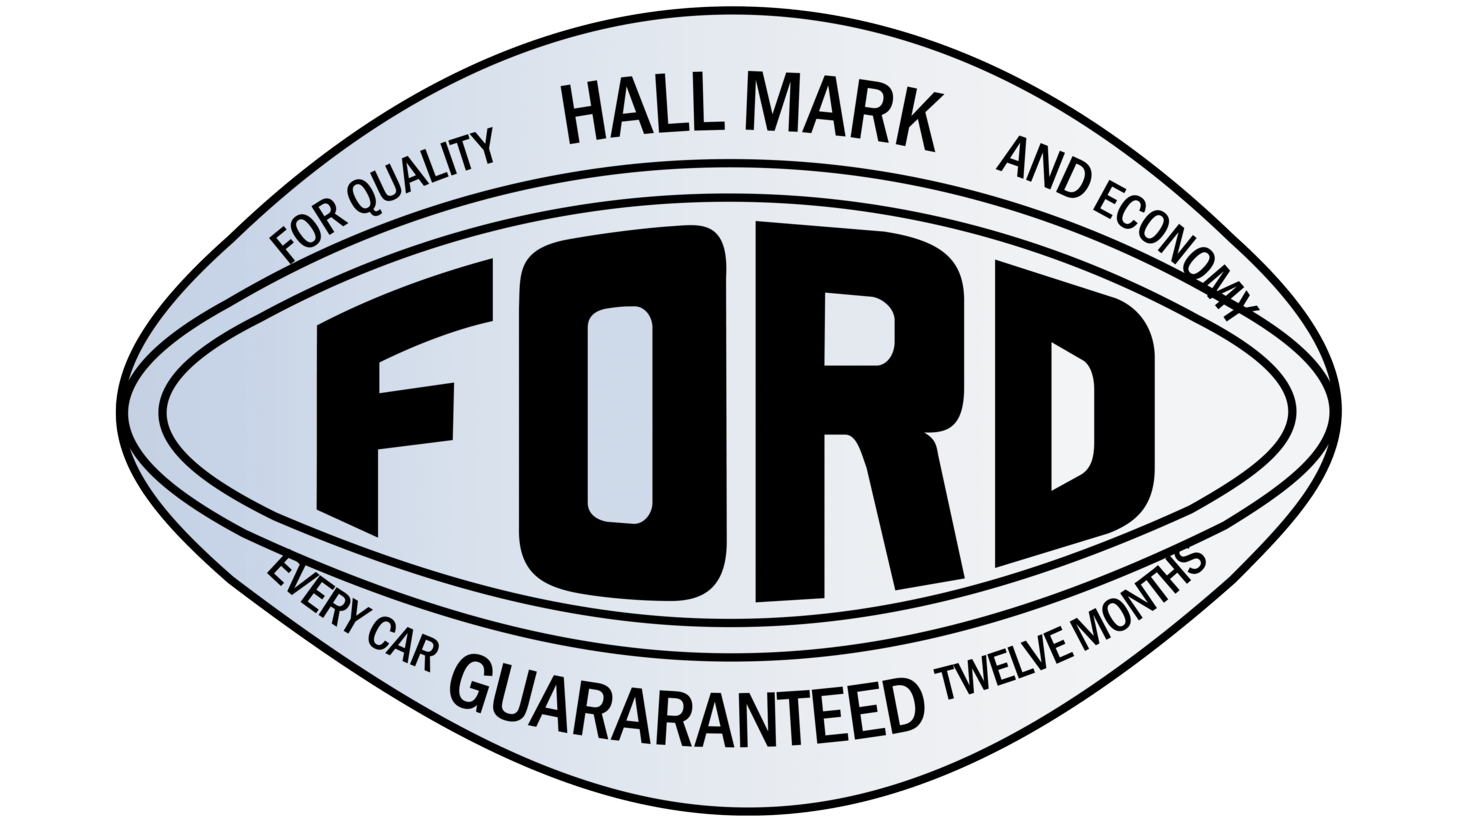 Ford sign 1907 1909